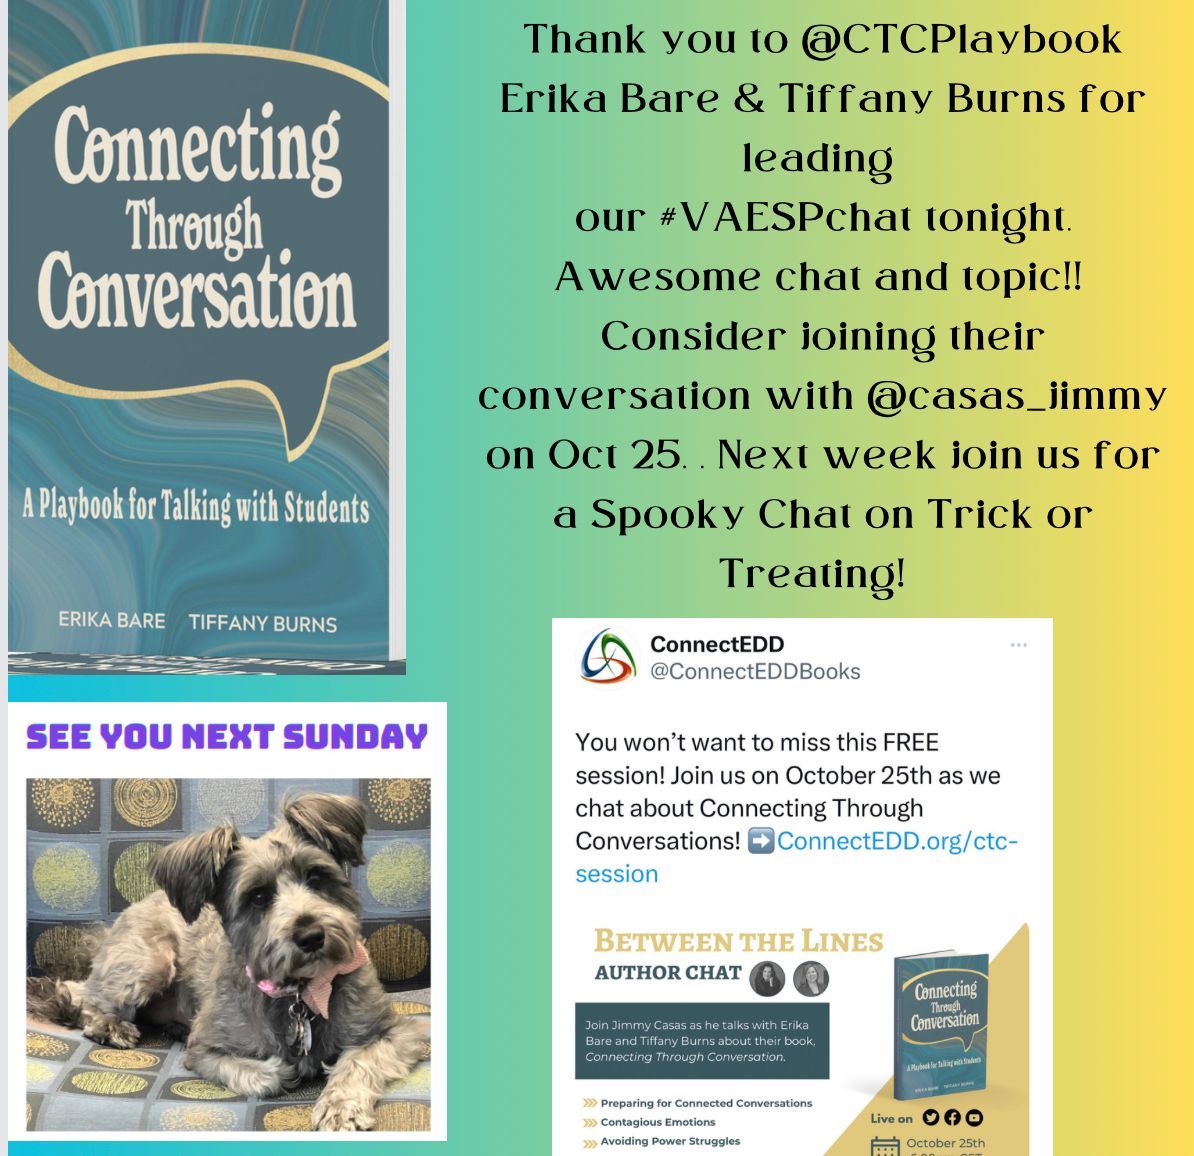 Thank you to @CTCPlaybook Erika Bare & Tiffany Burns for leading our #VAESPchat tonight. Awesome chat and topic!! Consider joining their conversation with @casas_jimmy on Oct 25 buff.ly/470EEs9 Next week join us for a Spooky Chat on Trick or Treating!